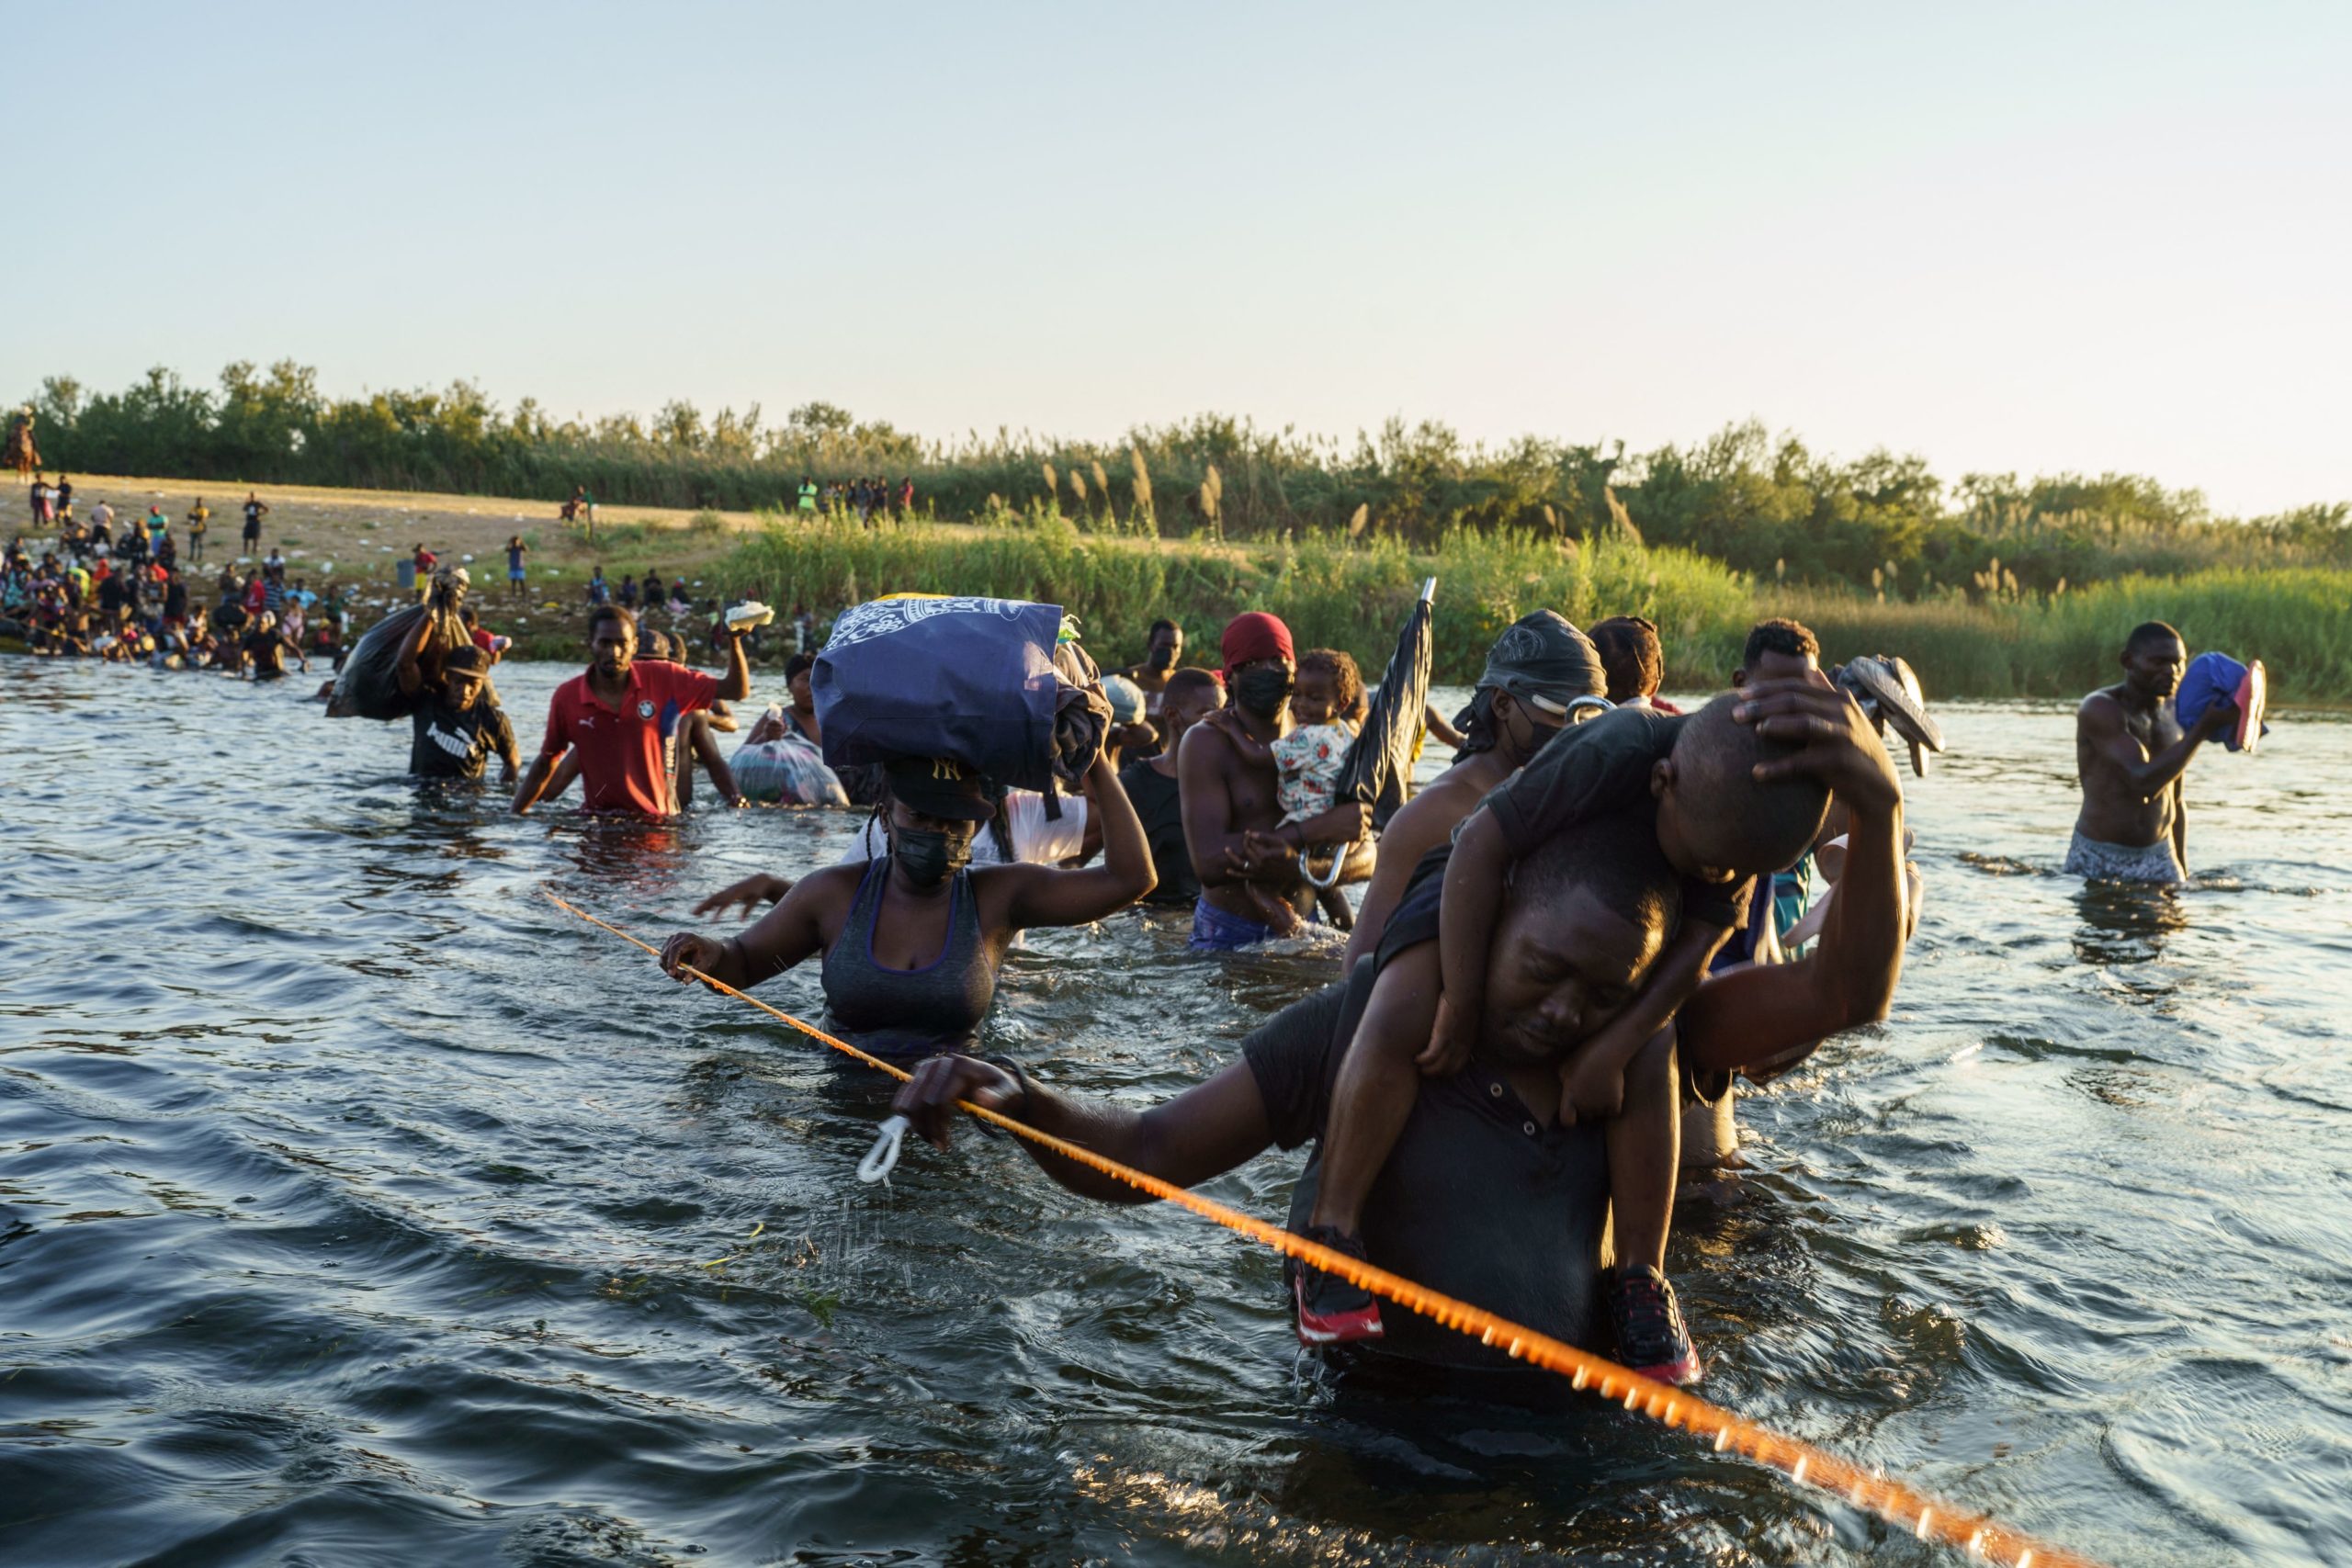 Haitian migrants continue to cross across the US-Mexico border on the Rio Grande as seen from Ciudad Acuna, Coahuila state, Mexico on September 20, 2021. (Photo by PAUL RATJE/AFP via Getty Images)